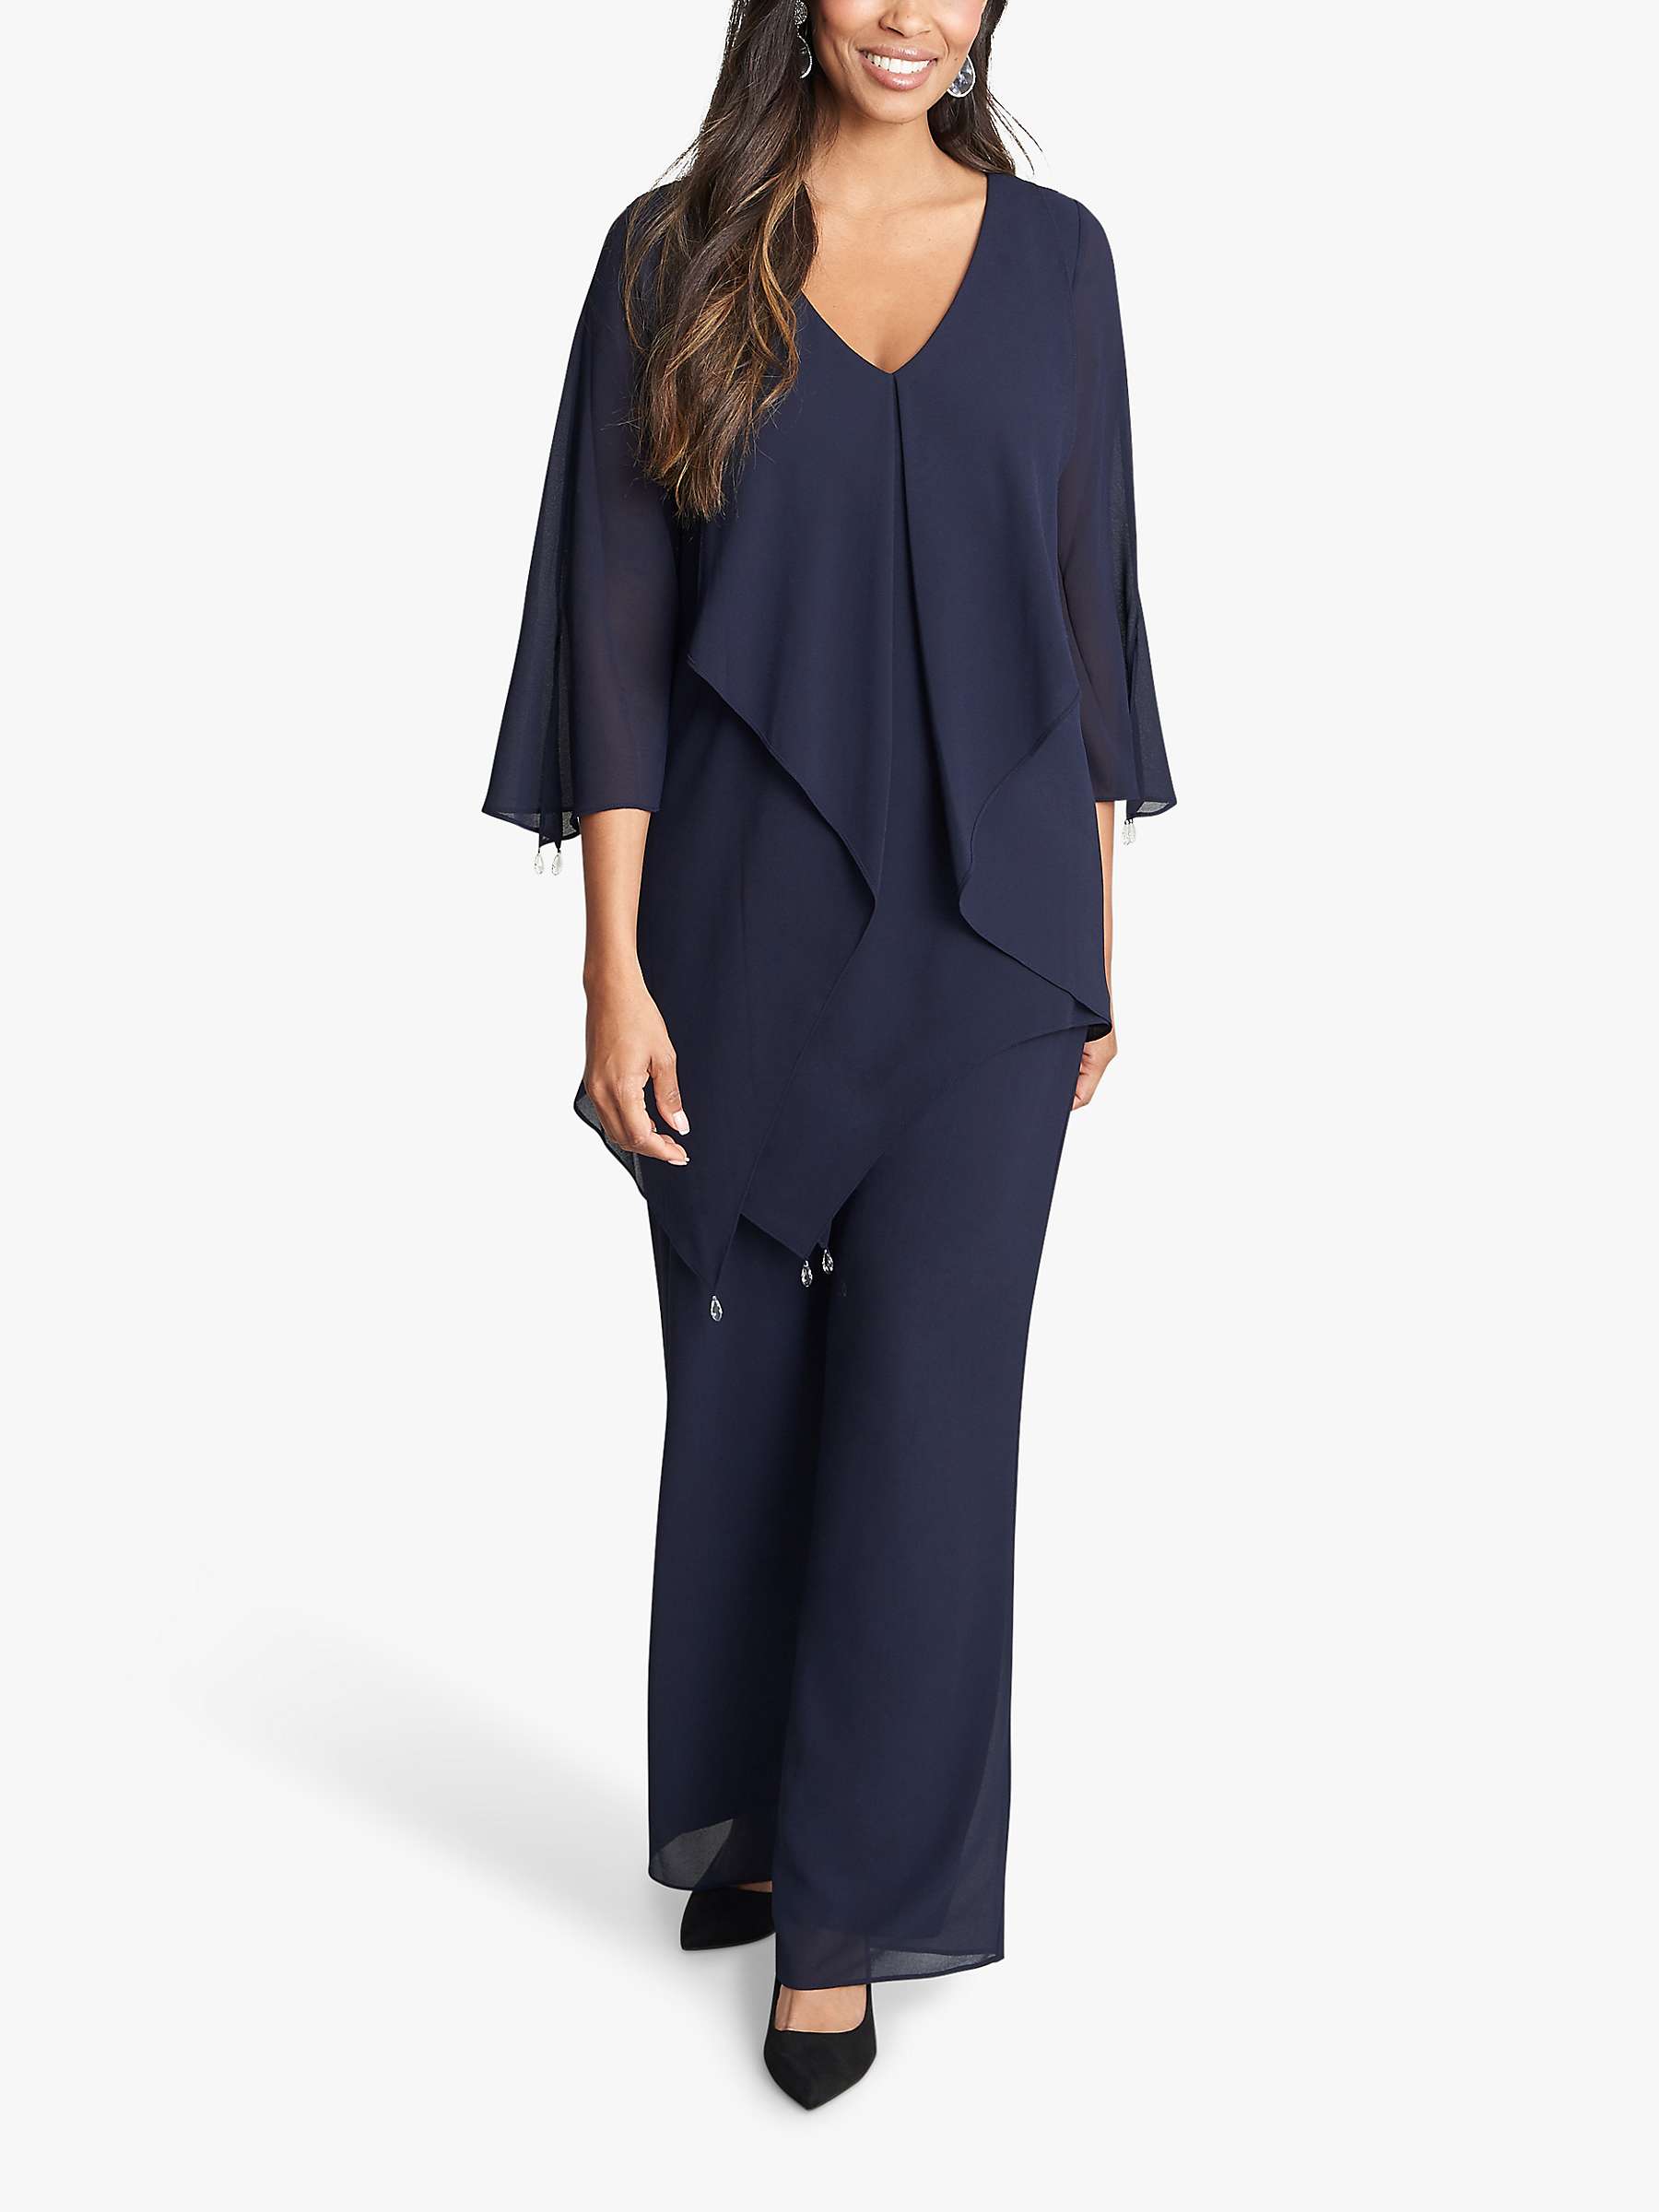 Buy Gina Bacconi Wilma 2-Piece Suit With Asymmetric Cascade Ruffle Blouse & Wide Leg Trousers, Navy Online at johnlewis.com